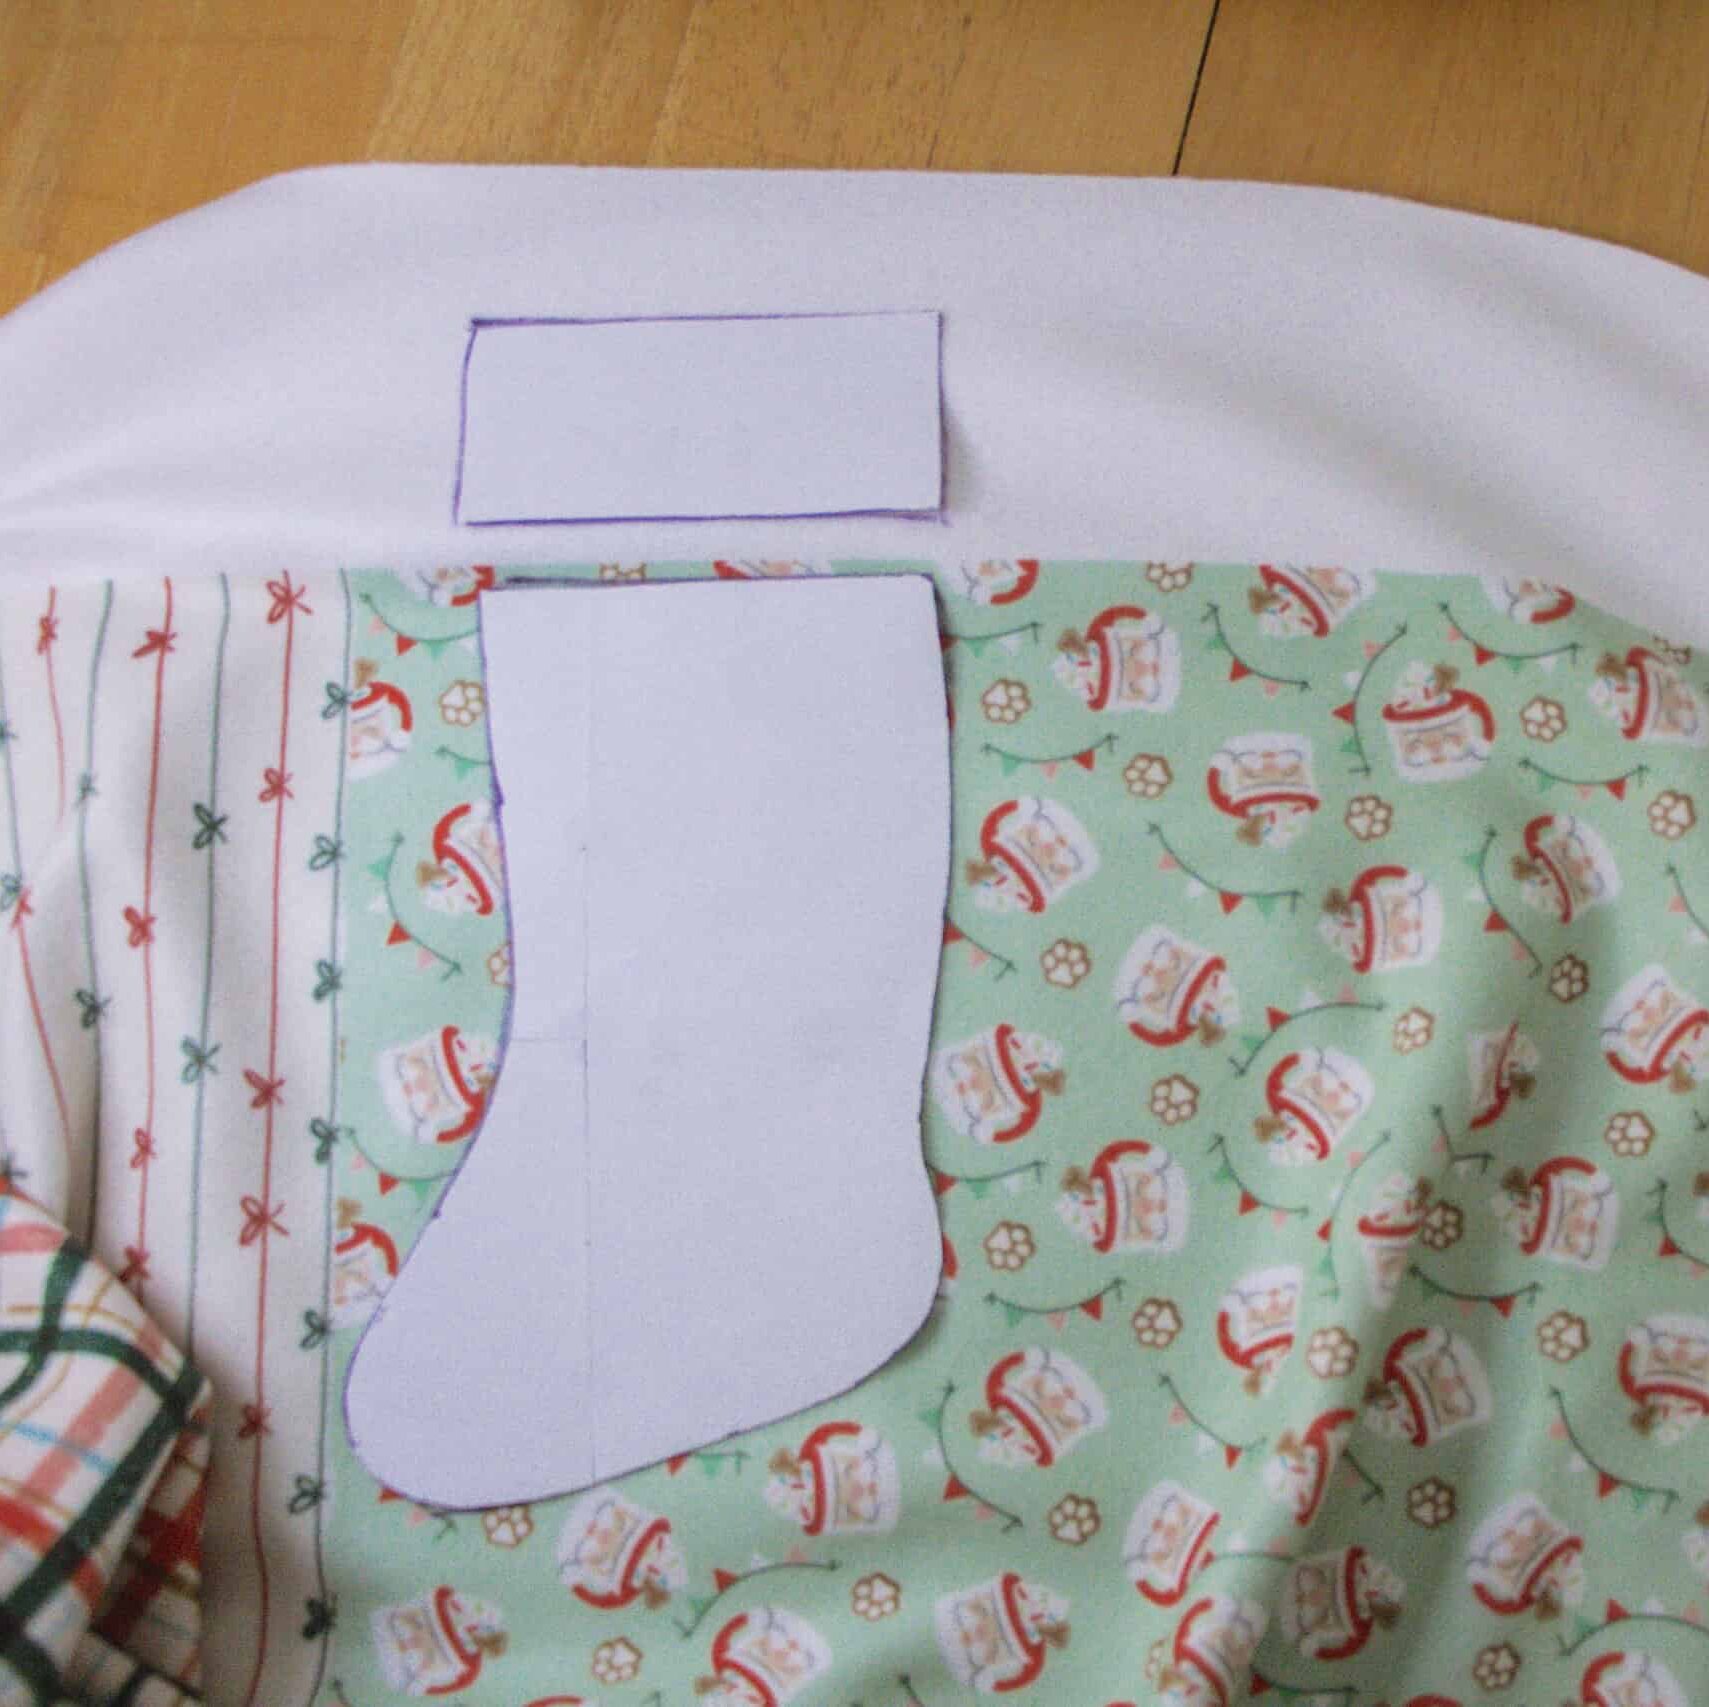 The stocking pattern’s boot and cuff have been cut in white paper. The piece of paper for the stocking’s cuff is laying on top of the white selvage edge of the fabric. The piece of paper for the stocking’s boot is laying on top of mint green fabric with a design of white mugs with red rims and handles with whipped cream and sprinkles on their tops. Small strips of fabric bunting are floating around the design as are white paw prints.